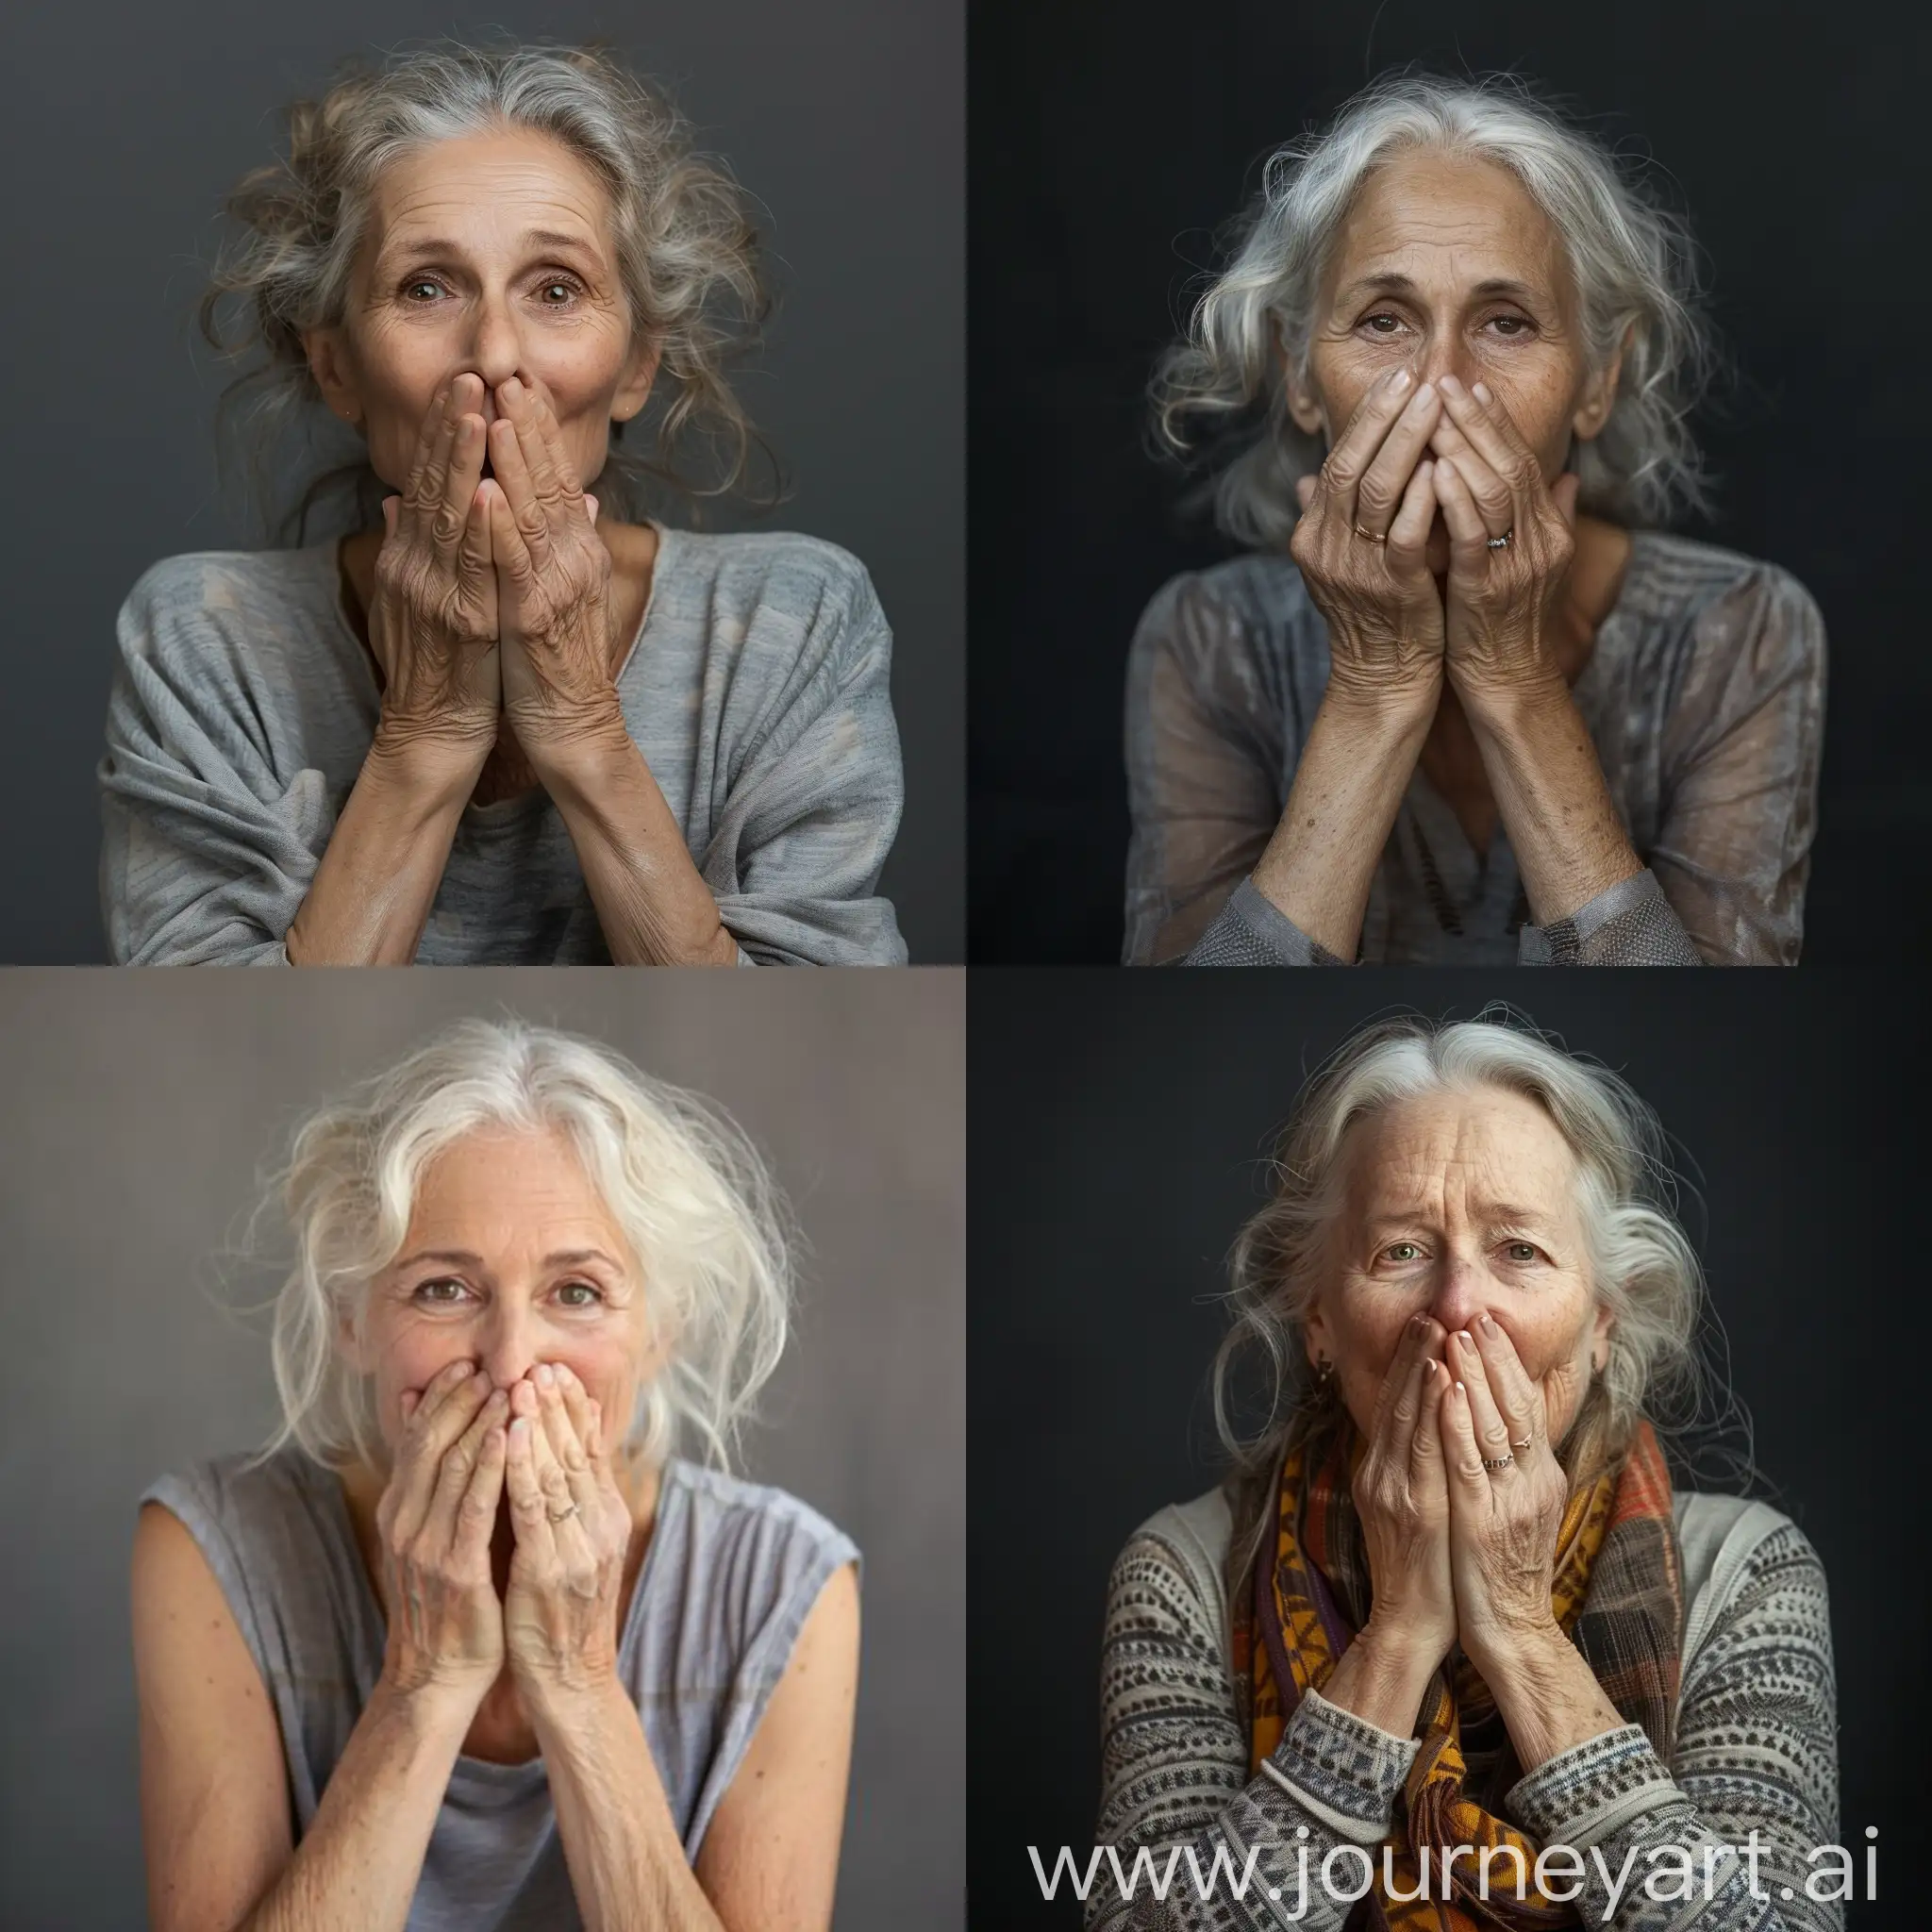 Mature-Woman-Expressing-Surprise-and-Joy-Stock-Photo-for-Positive-Magazine-Content